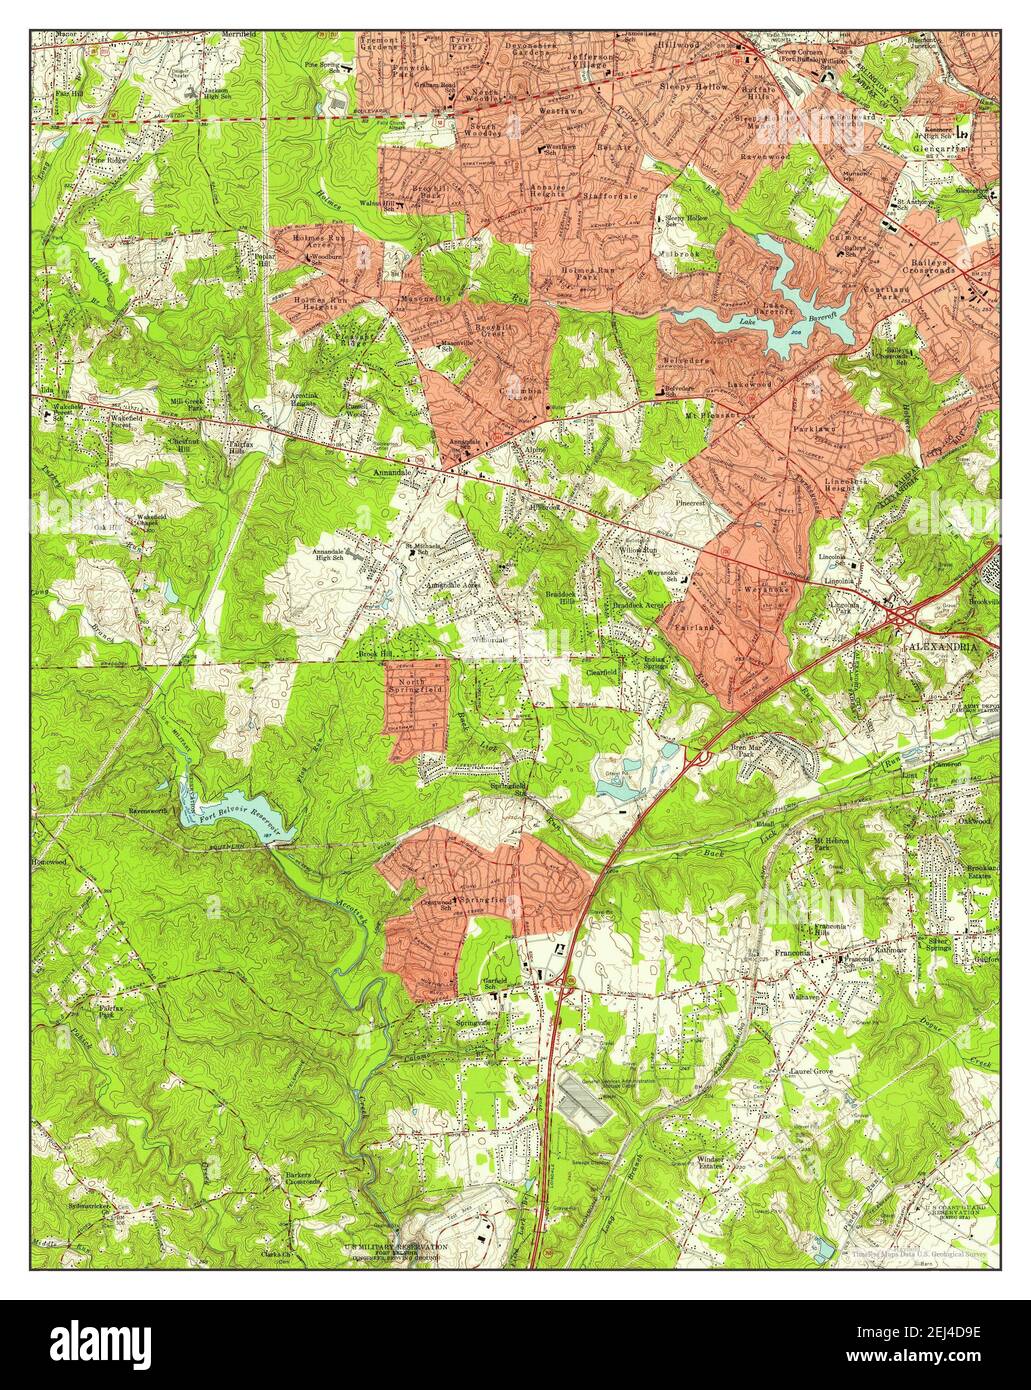 Annandale, Virginia, map 1956, 1:24000, United States of America by Timeless Maps, data U.S. Geological Survey Stock Photo